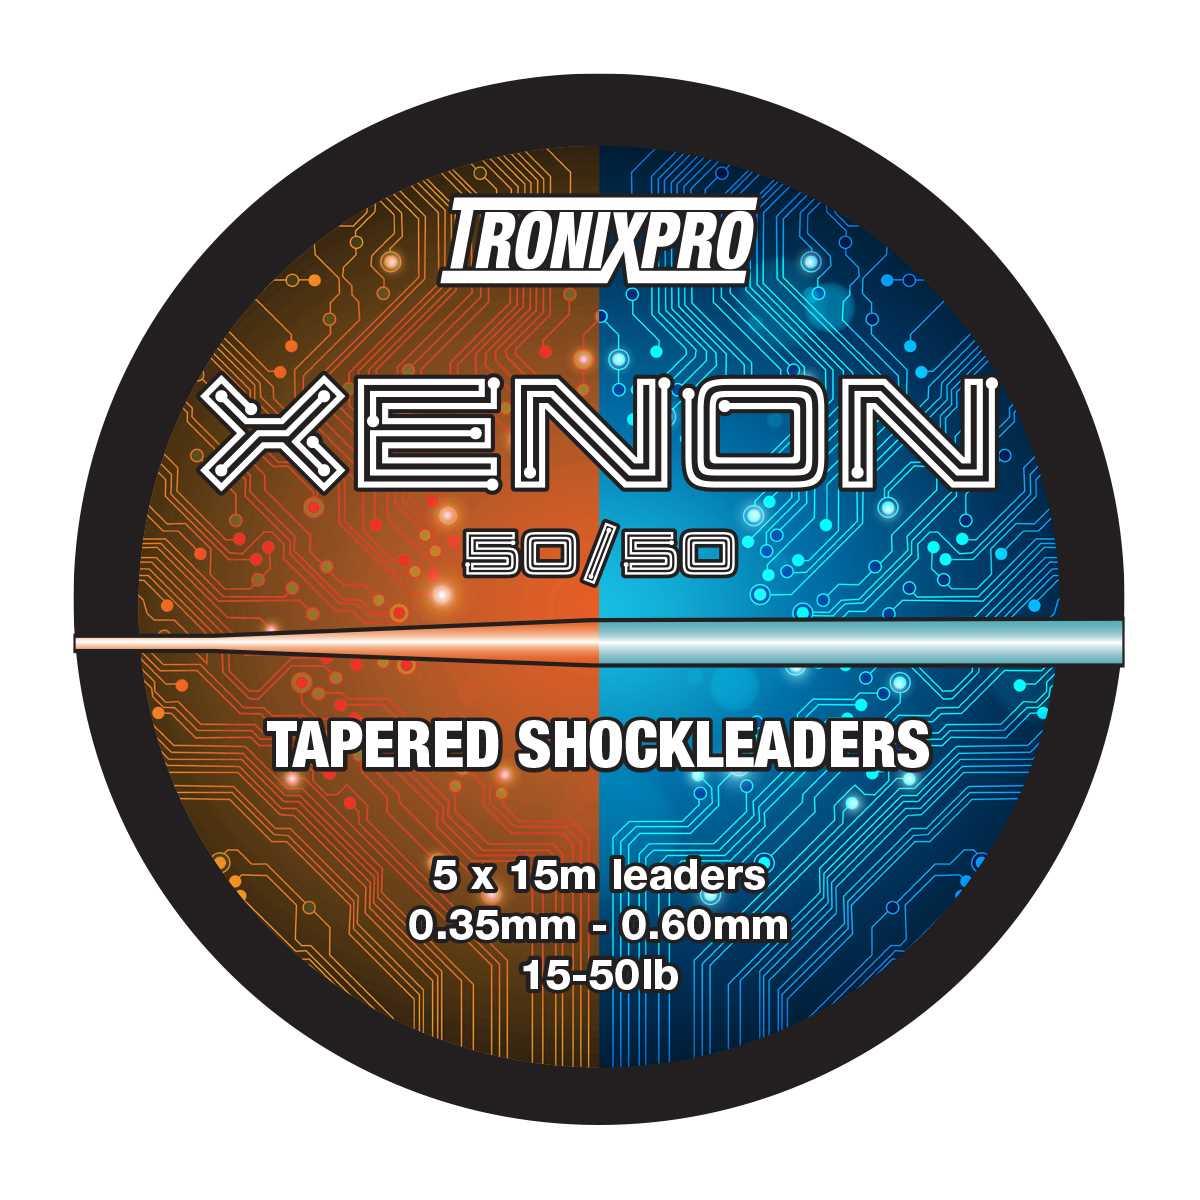 Tronixpro Xenon Tapered Leader 50/50